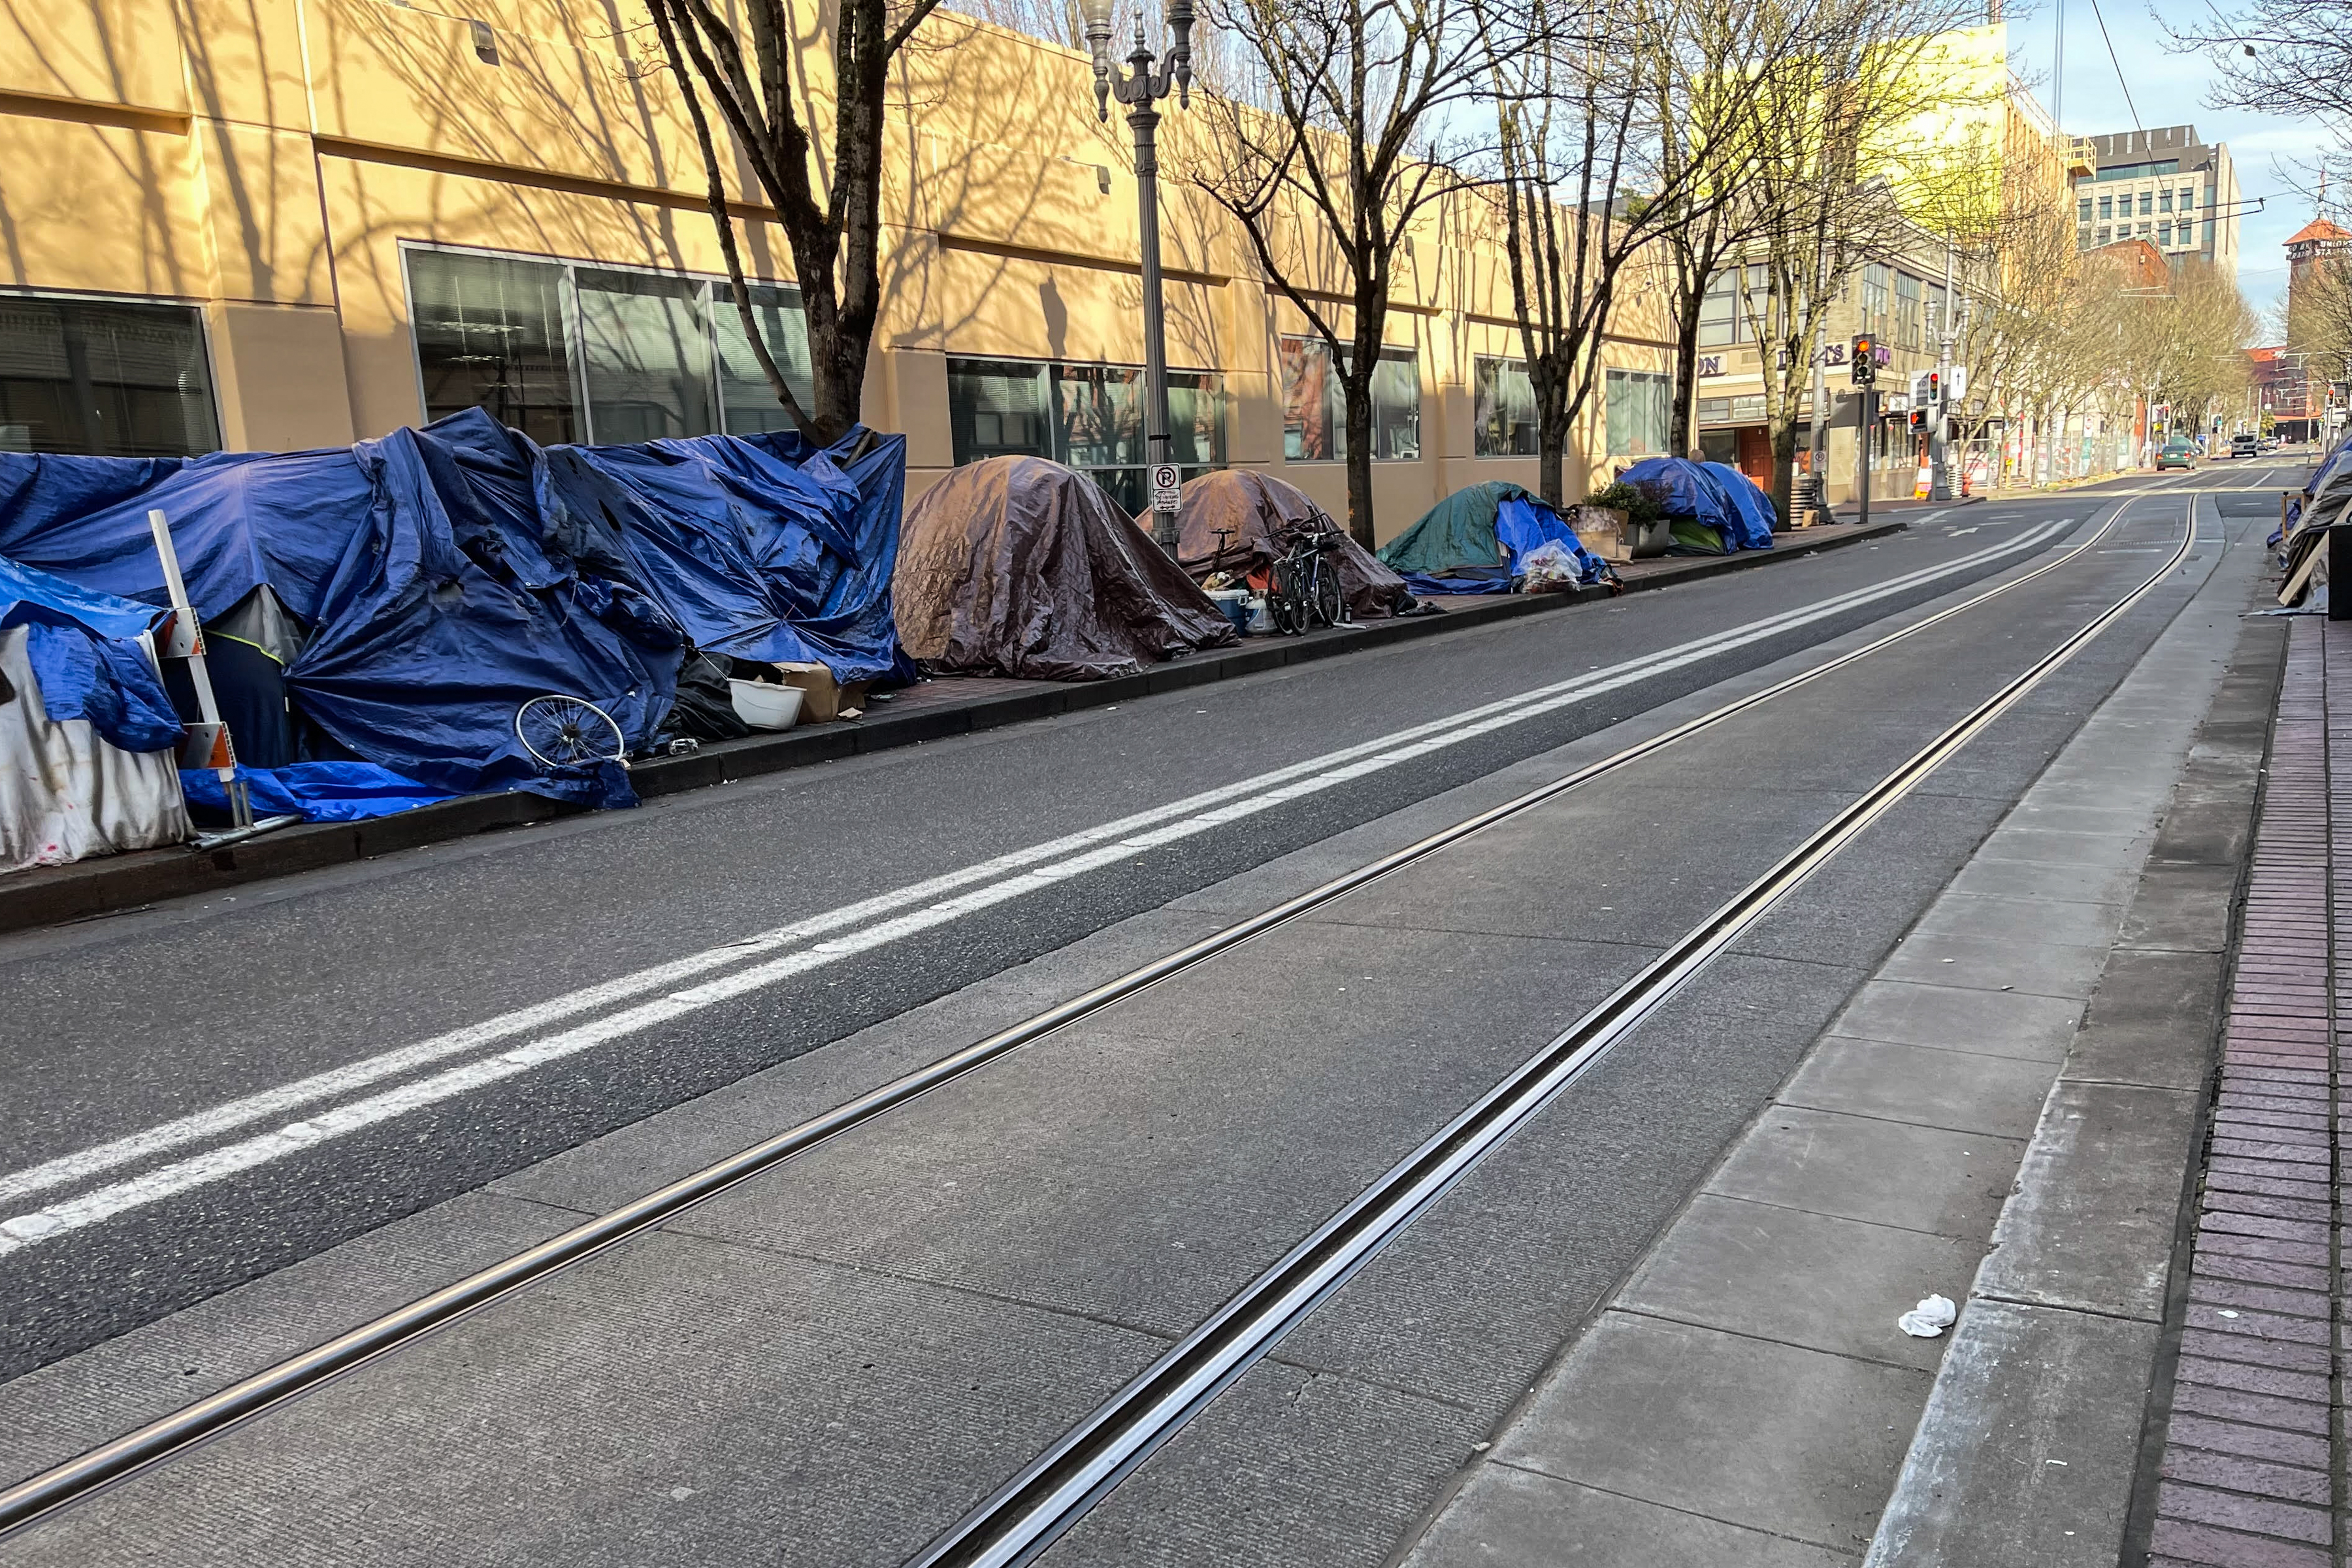 A photo shows a row of tents lining the street in downtown Portland, Oregon.